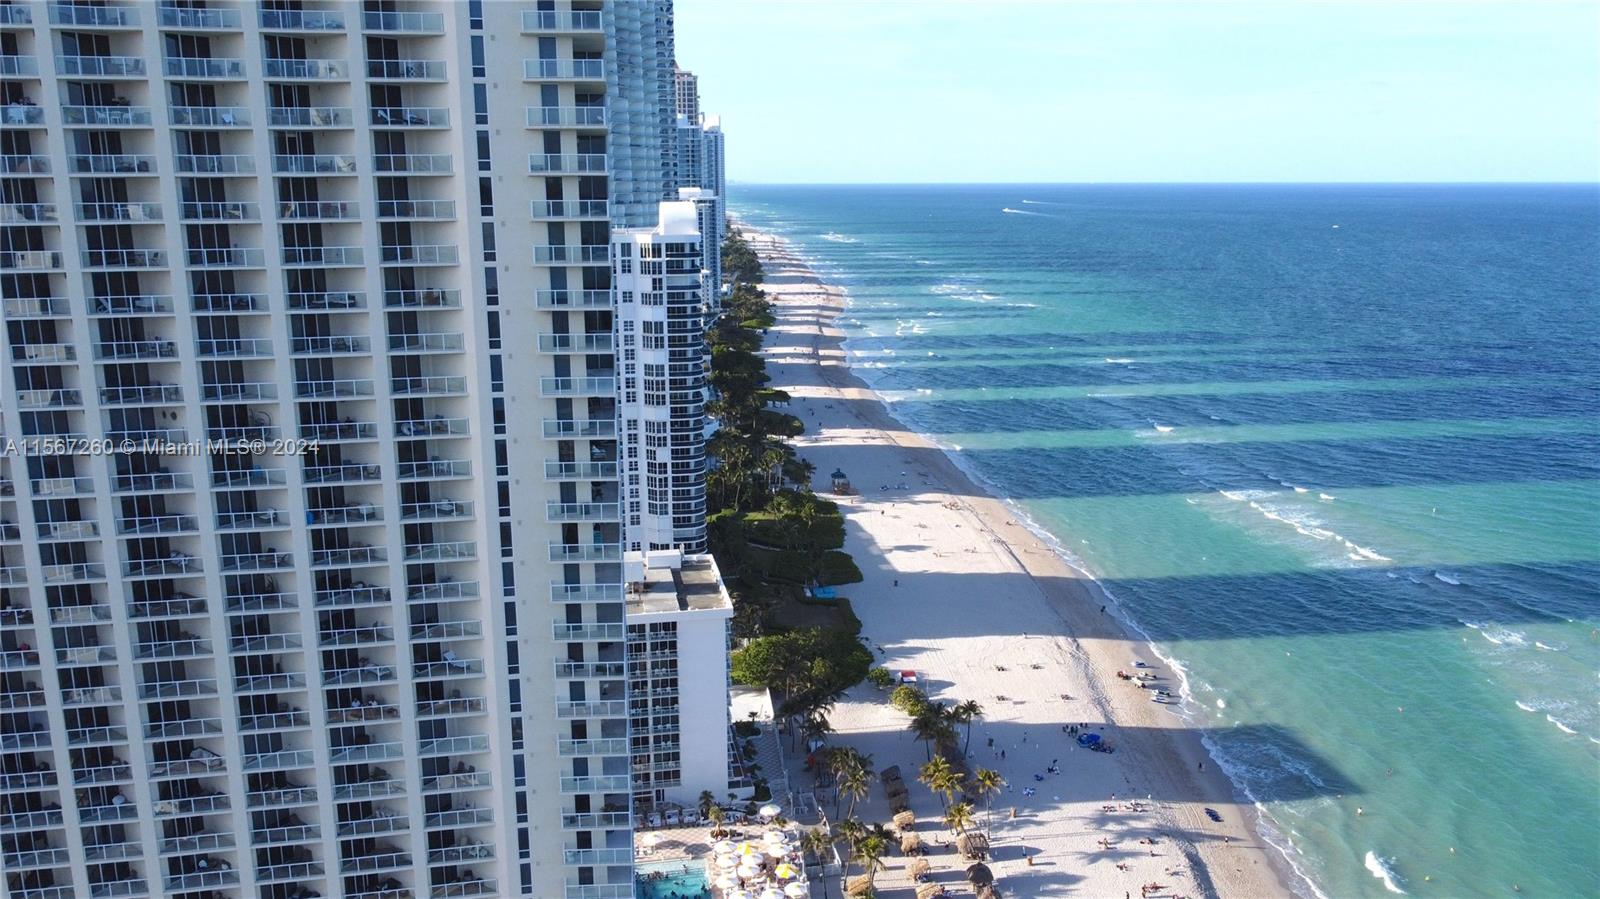 Welcome to your 2-bed, 2-bath luxury condo in Sunny Isles, FL! This 1266 sq. ft. unit offers luxurious comfort with ocean and city views. You can enjoy the beach and pool service, which are among the amenities of the building. This unit is also available as a vacation rental, making it an ideal choice for a relaxing getaway. Additionally, it is located close to great restaurants and shops so that you can enjoy the vibrant city life. Pets are allowed, so bring your furry friends. Schedule a showing today and see why this is the perfect place to call home or vacation rental.